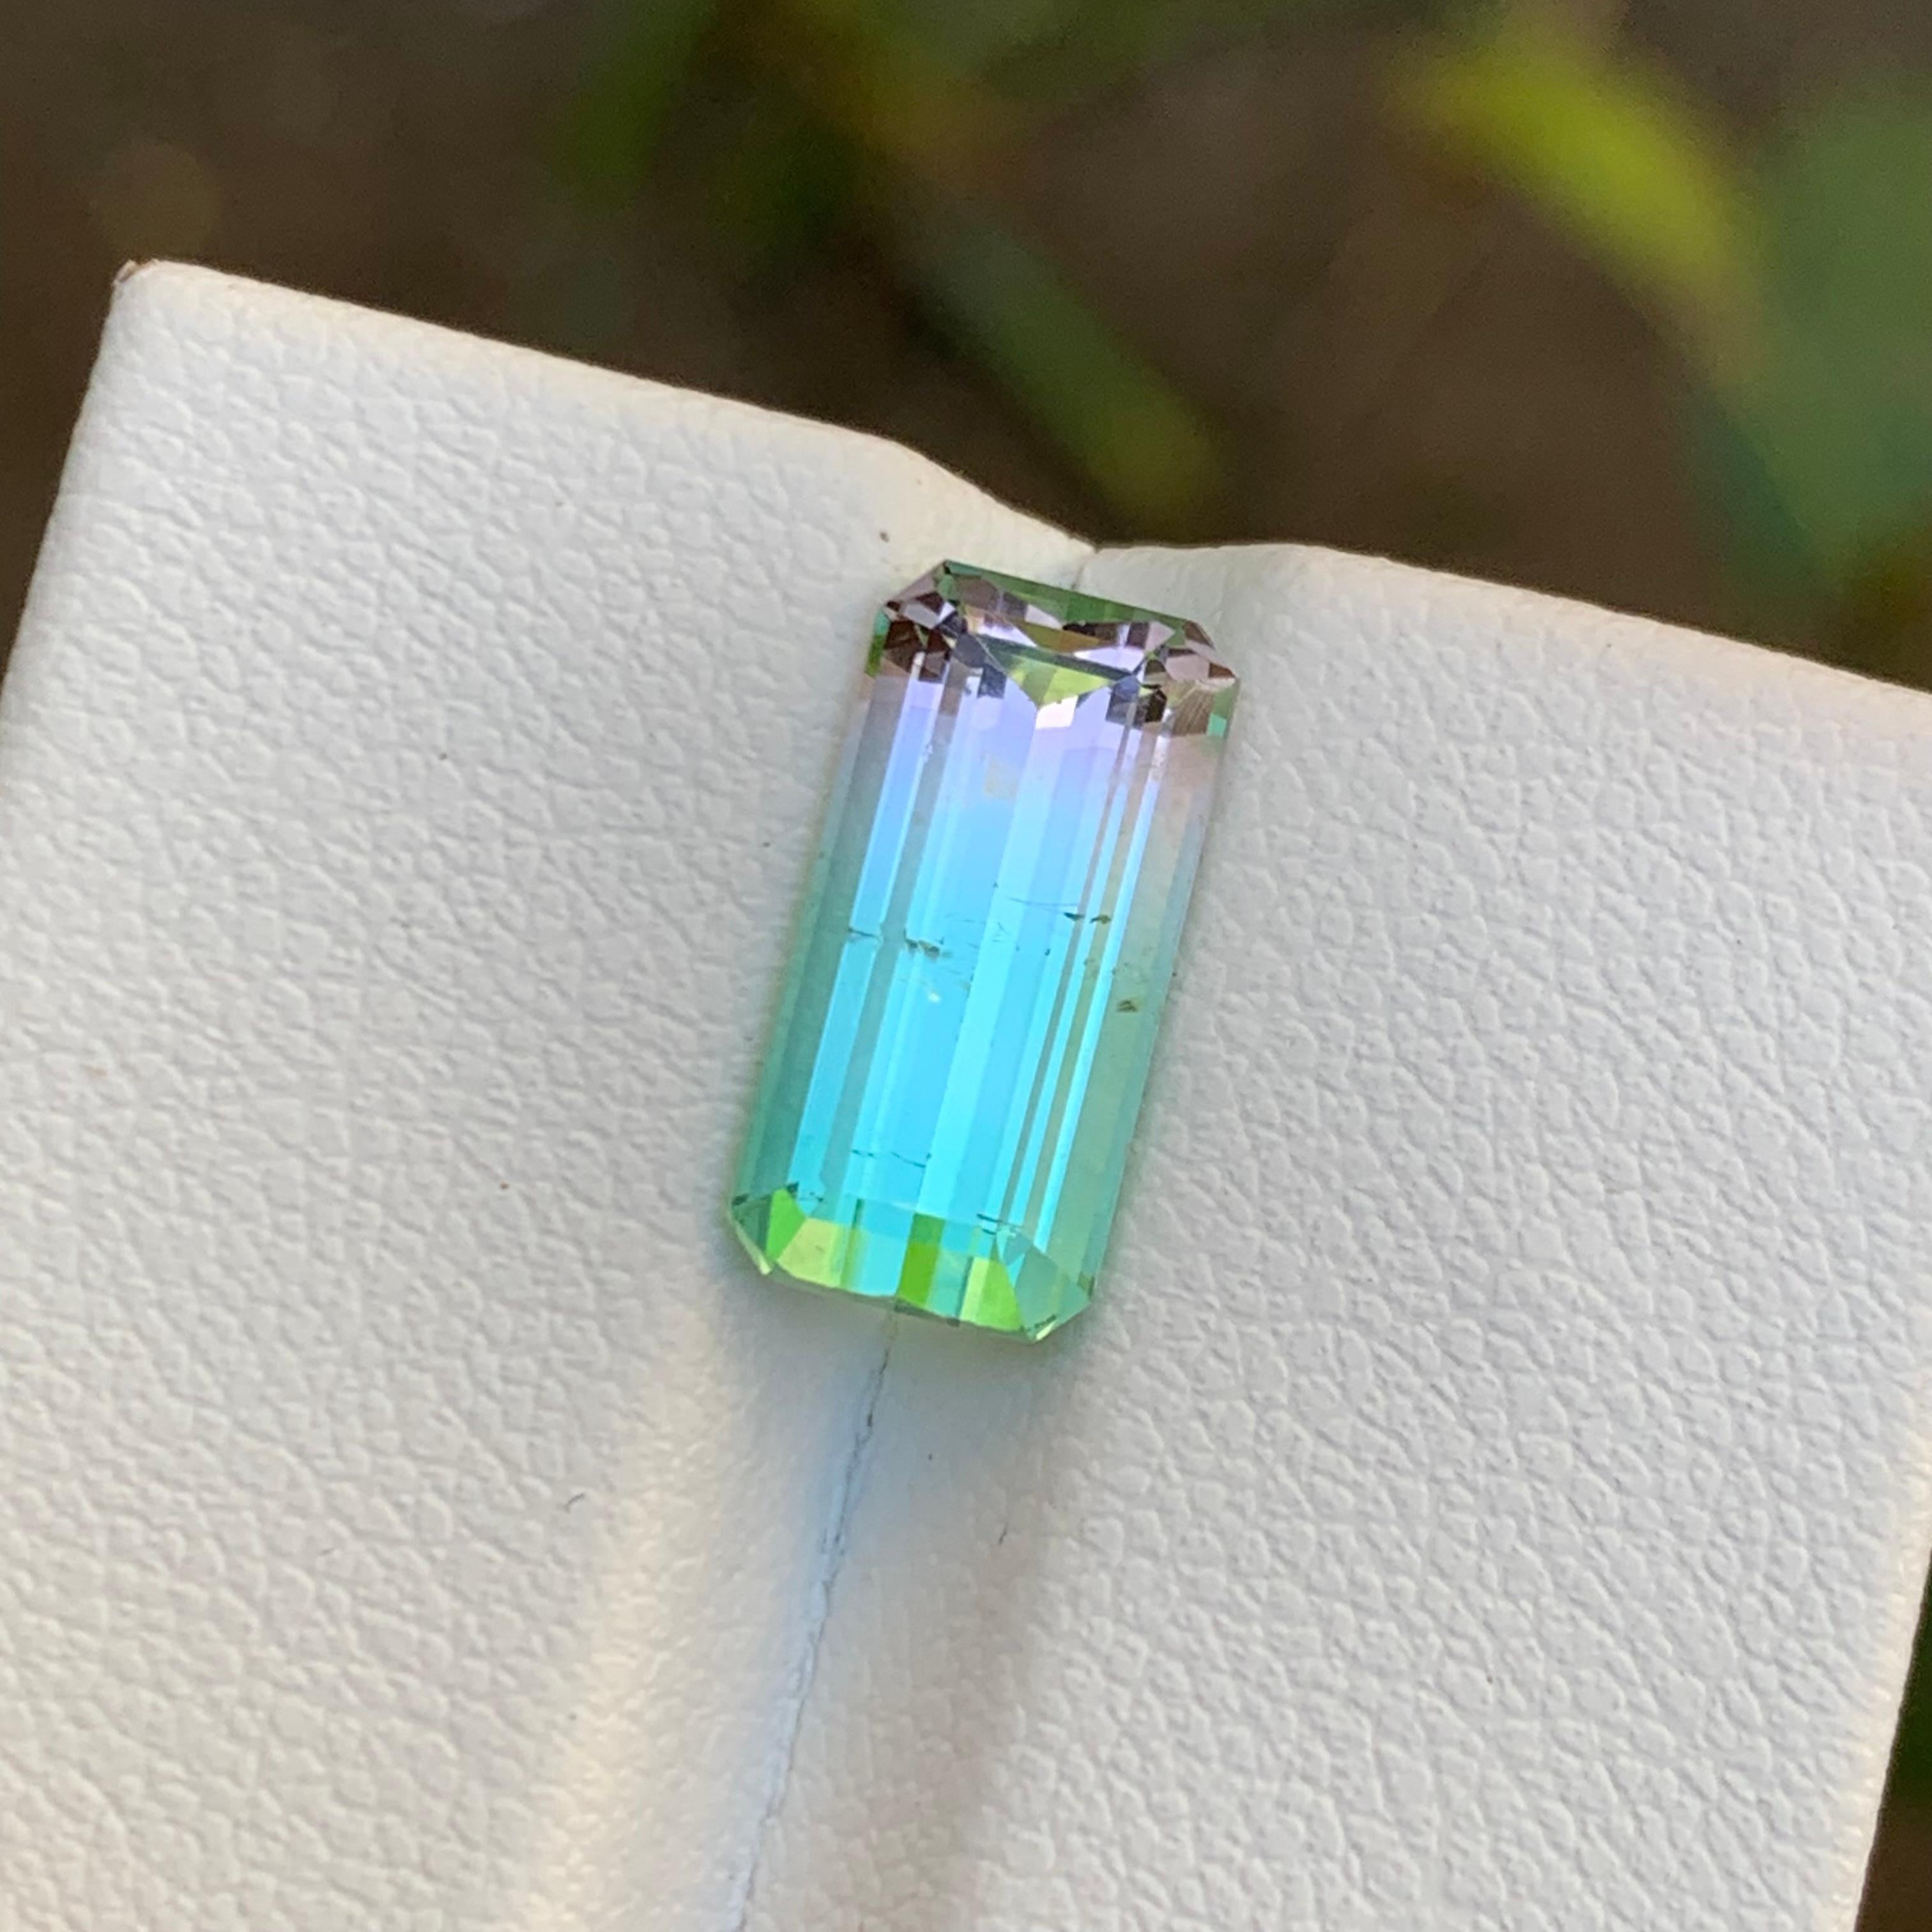 GEMSTONE TYPE: Tourmaline
PIECE(S): 1
WEIGHT: 3.95 Carats
SHAPE: Emerald Cut
SIZE (MM): 13.03 x 6.48 x 5.22
COLOR: Bicolor Neon Bluish Green and Pink
CLARITY: Slightly Included 
TREATMENT: None
ORIGIN: Afghanistan
CERTIFICATE: On demand
(if you